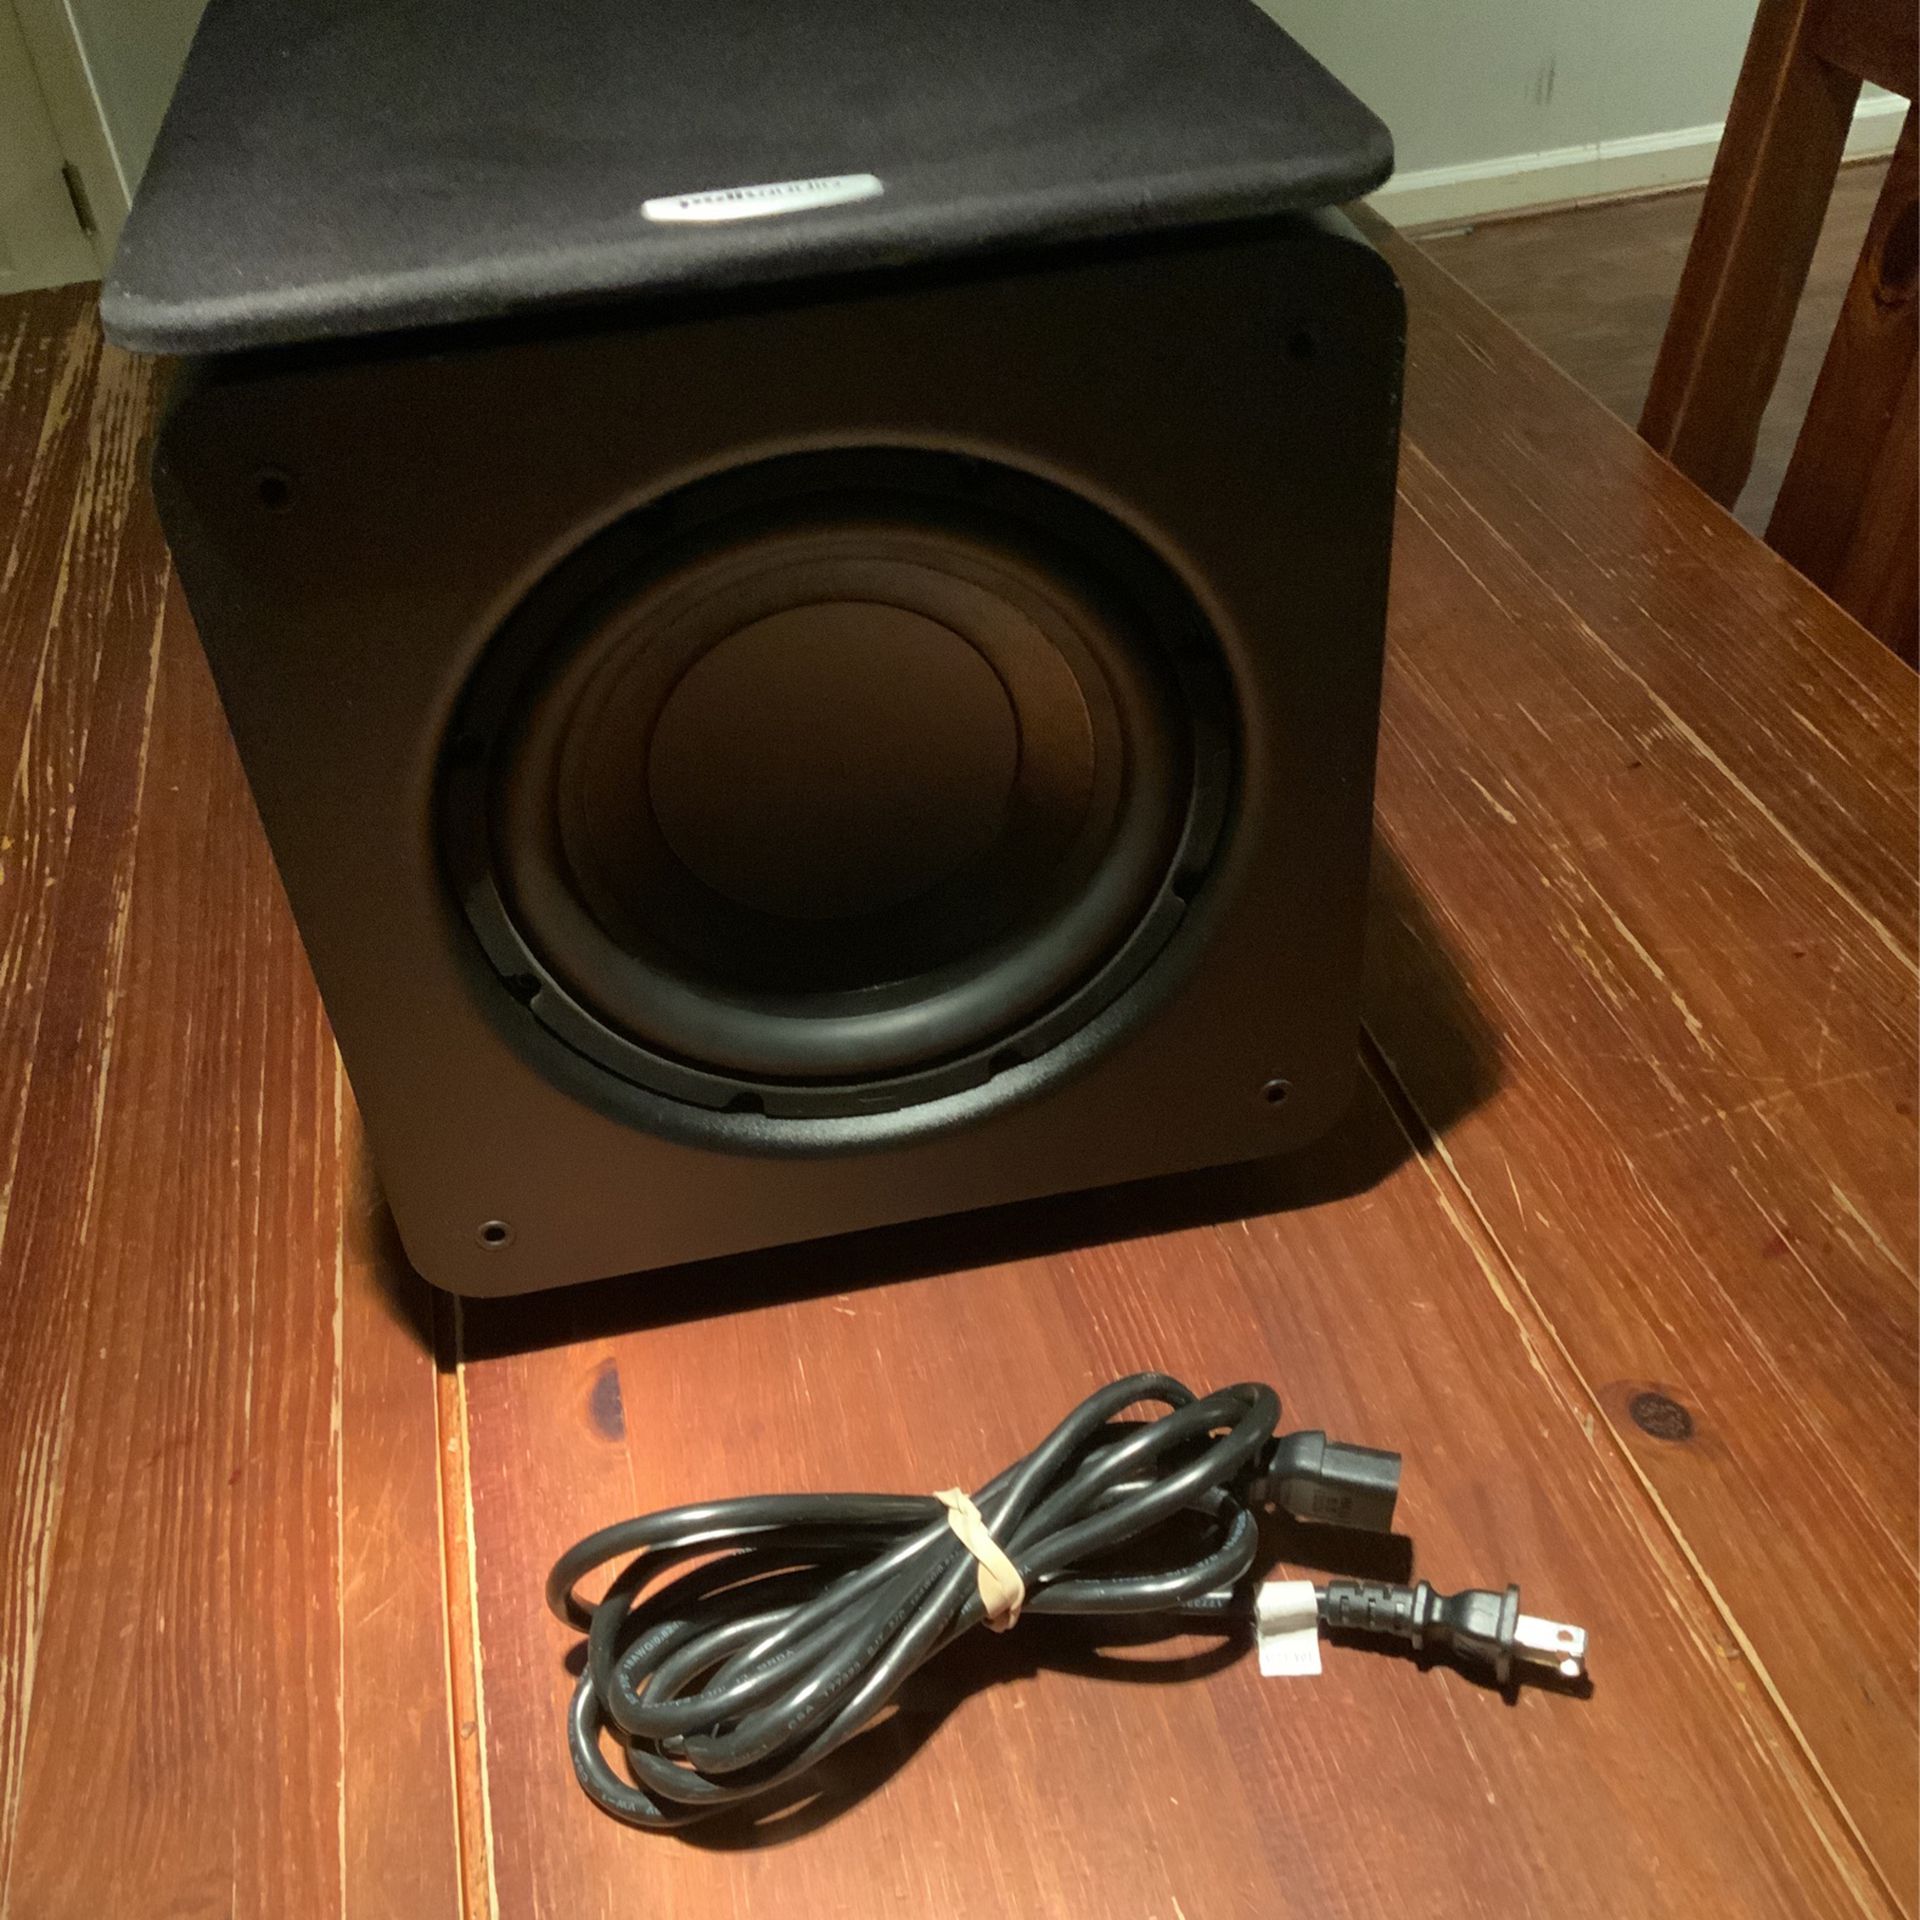 Polk Audio PSW111 8" Powered Subwoofer - Power Port Technology | Up to 300 Watt Amp | Big Bass in Compact Size | Easy Setup with Home Theater Systems 